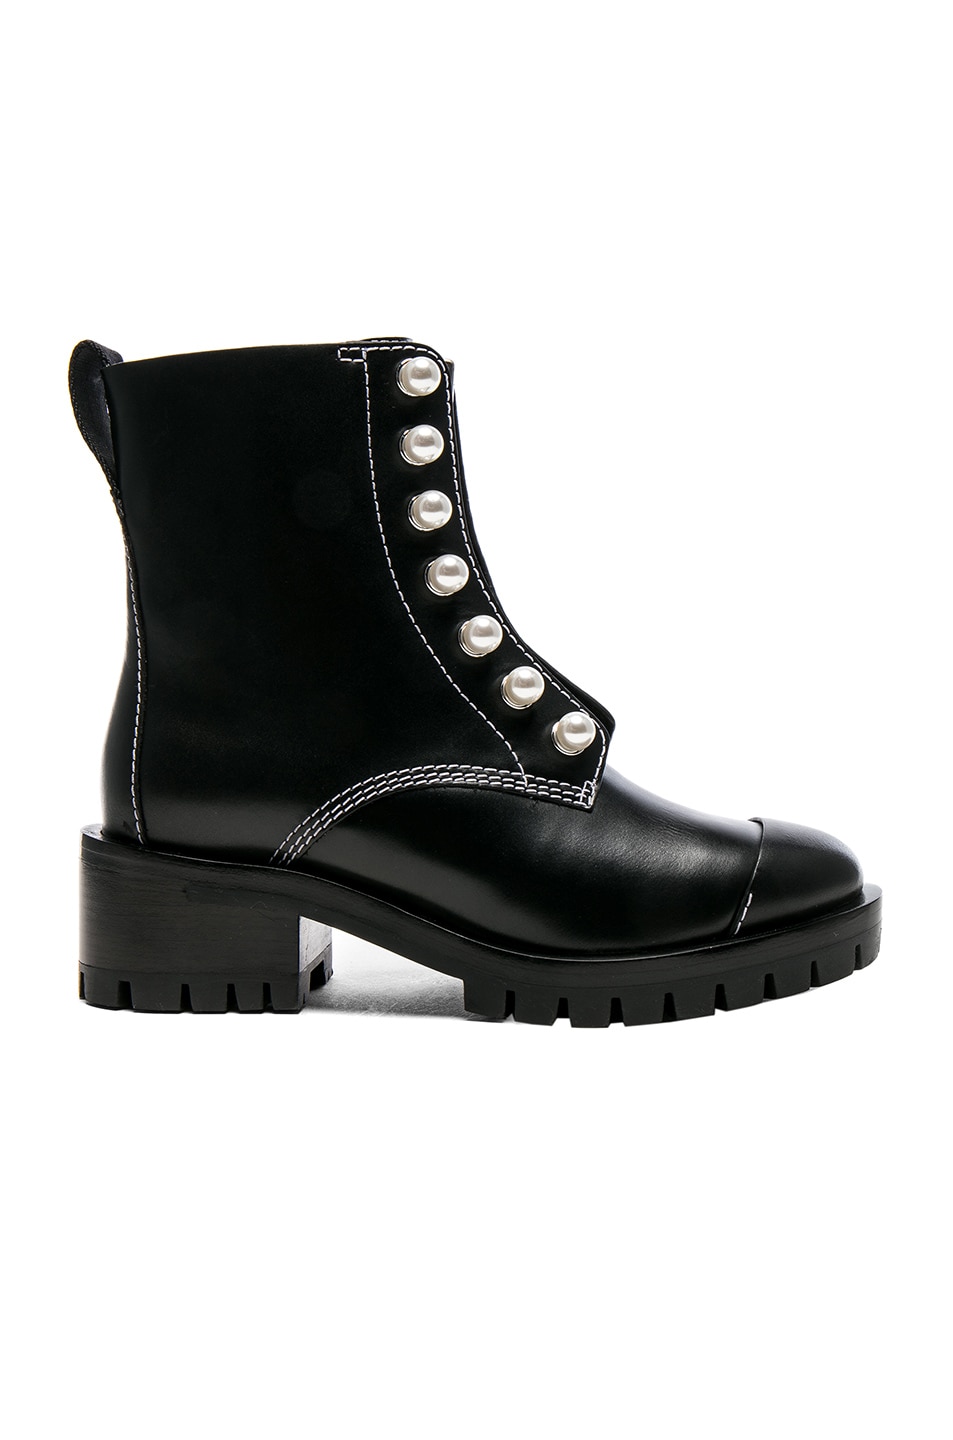 3.1 phillip lim Lug Sole Zipper Leather Boots with Pearls in Black | FWRD